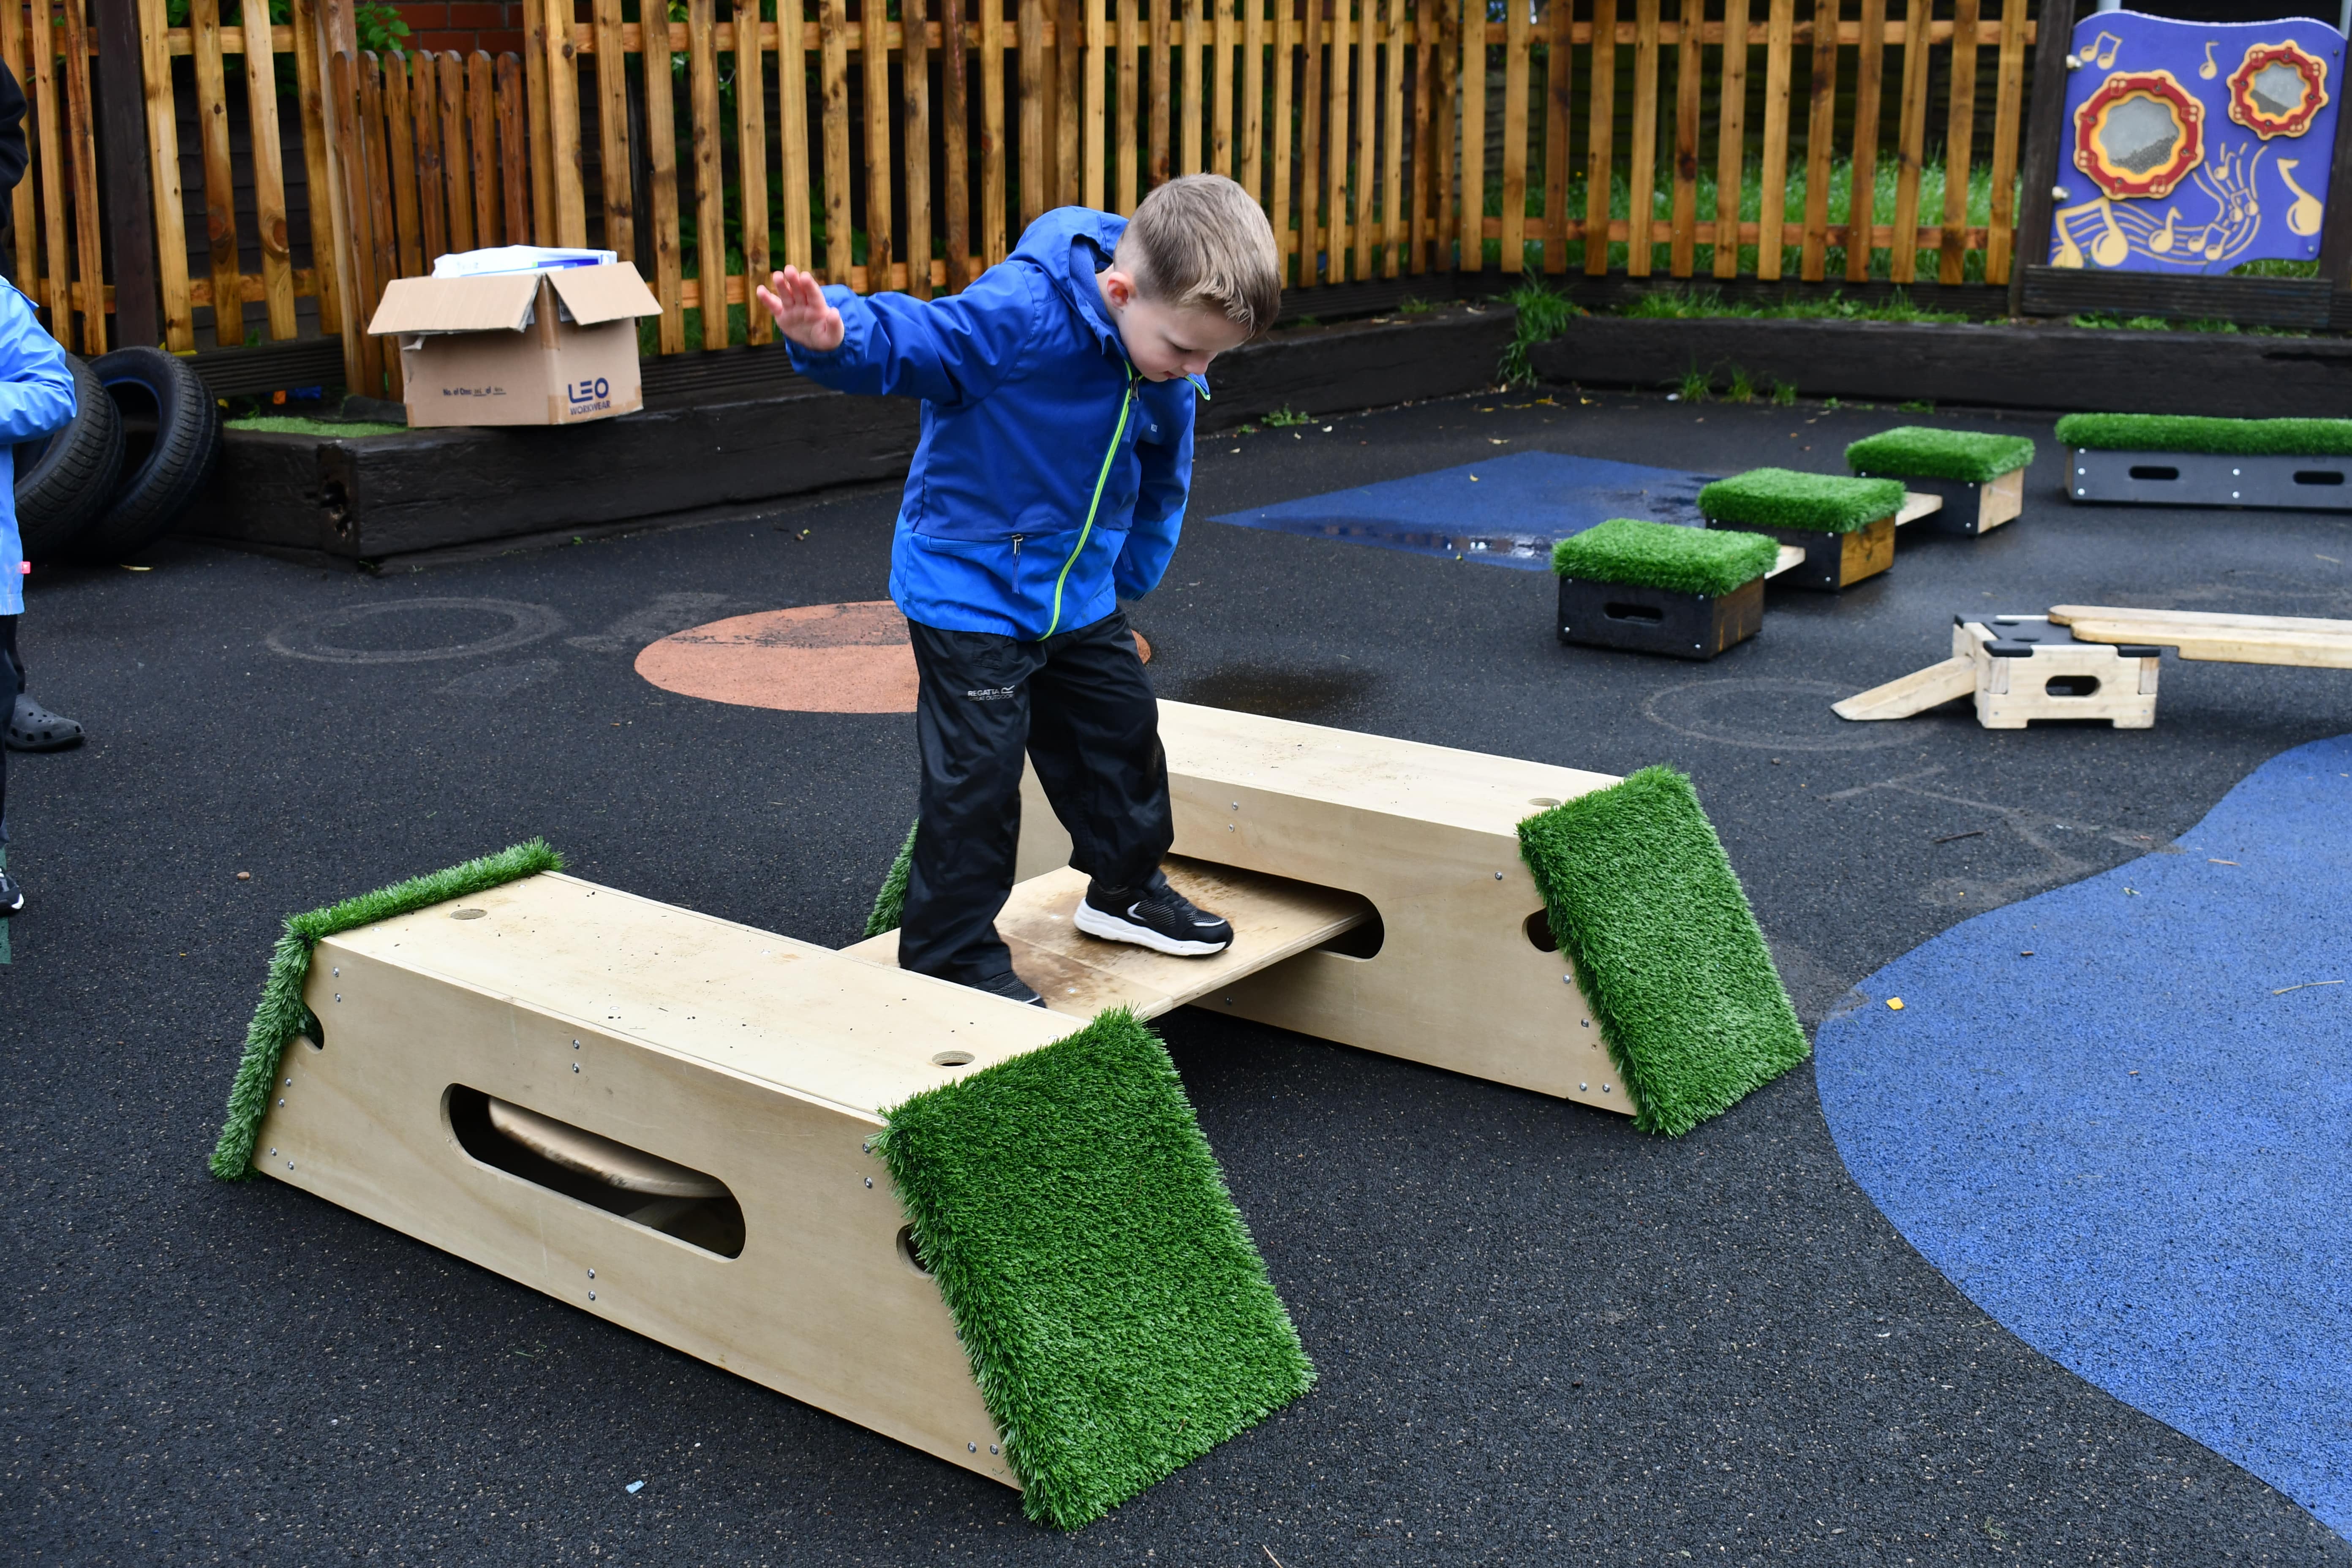 A child is trying to balance on a board which is connected to two wooden blocks, creating a platform for rocking on. The child is sticking his arms out to try and balance whilst looking down at his feet.